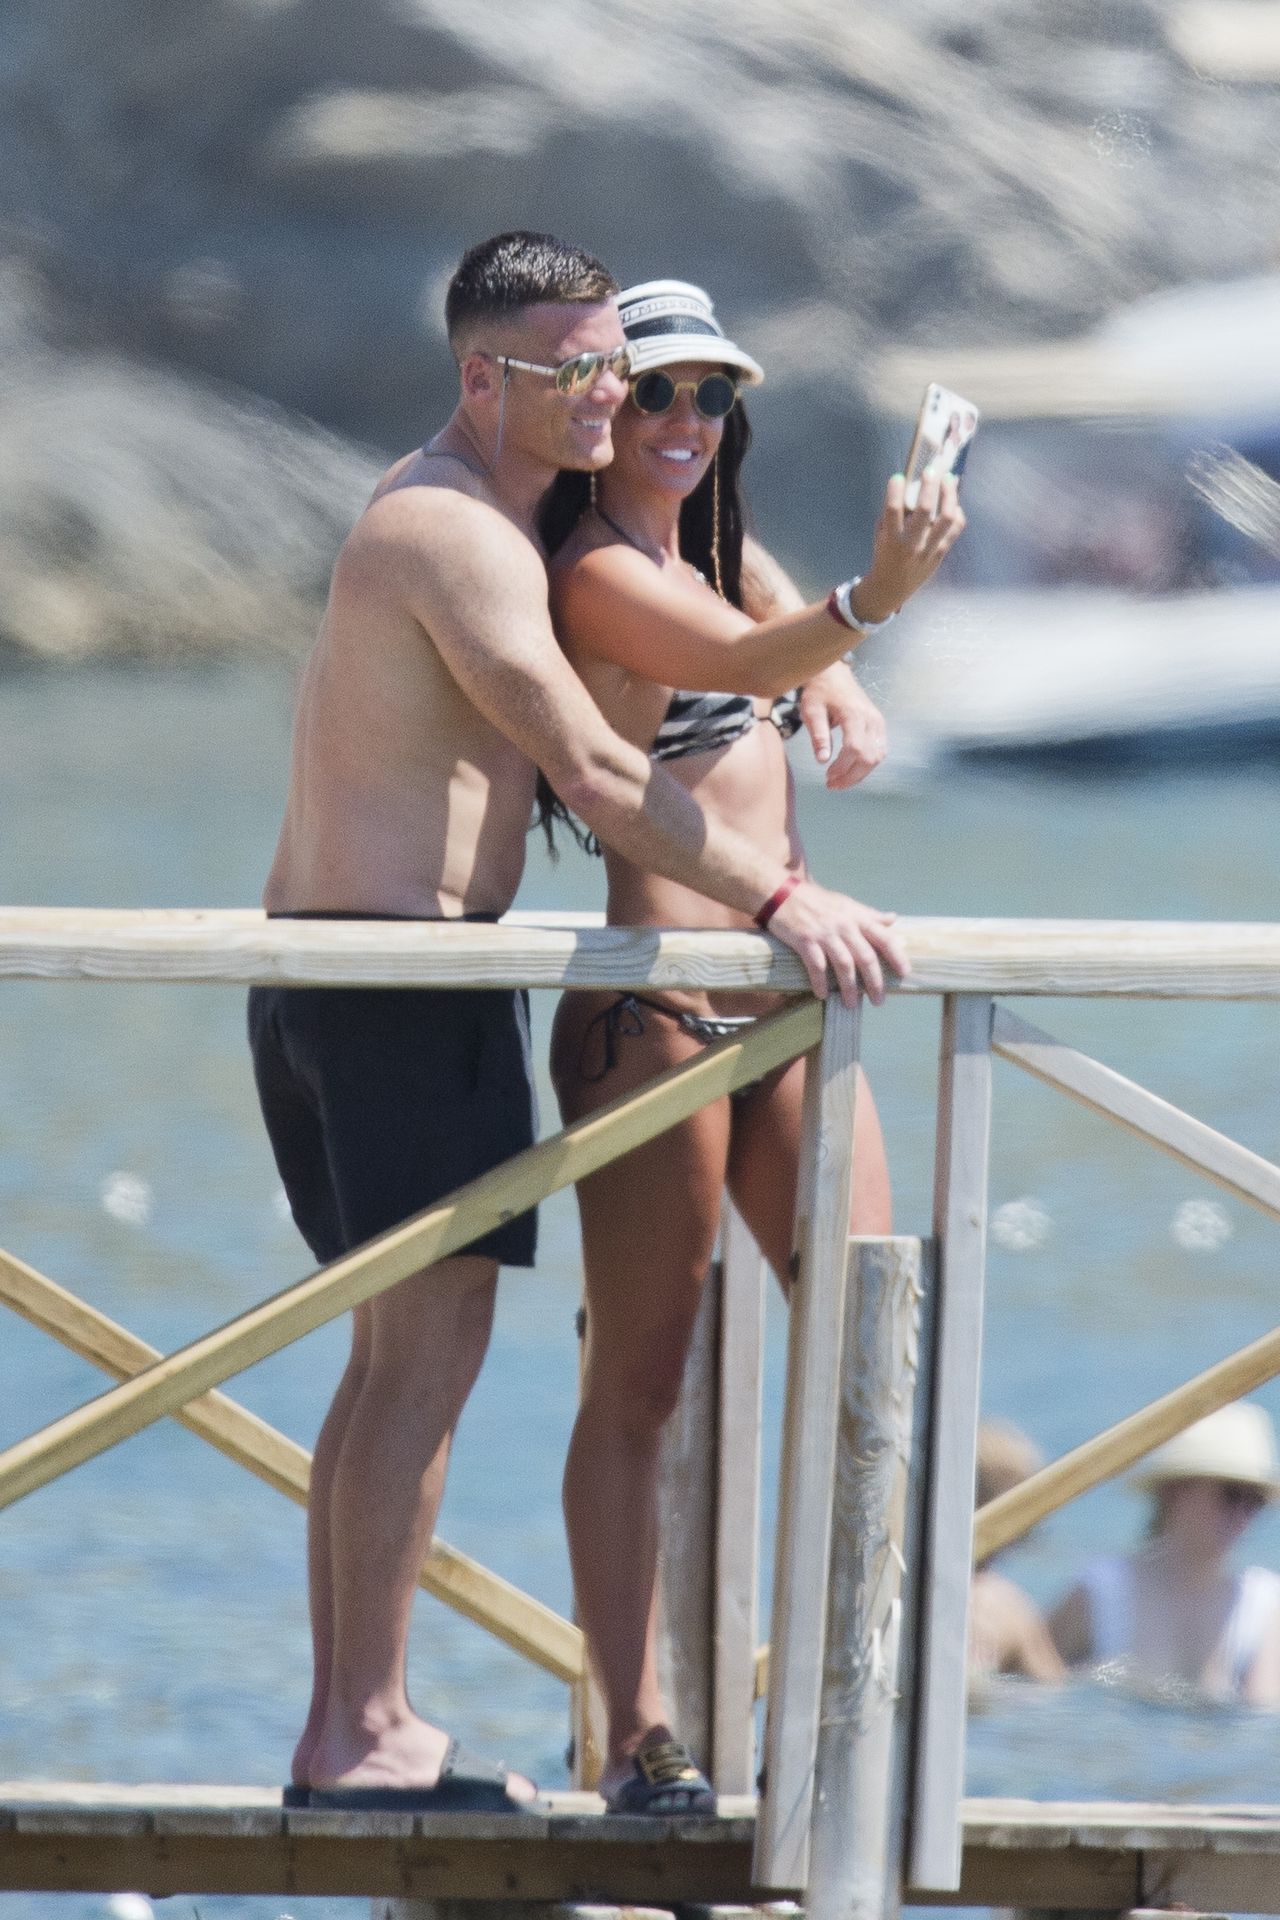 Danielle Lloyd Parties with
Her Husband Michael and Friends in Ibiza (129 Photos)